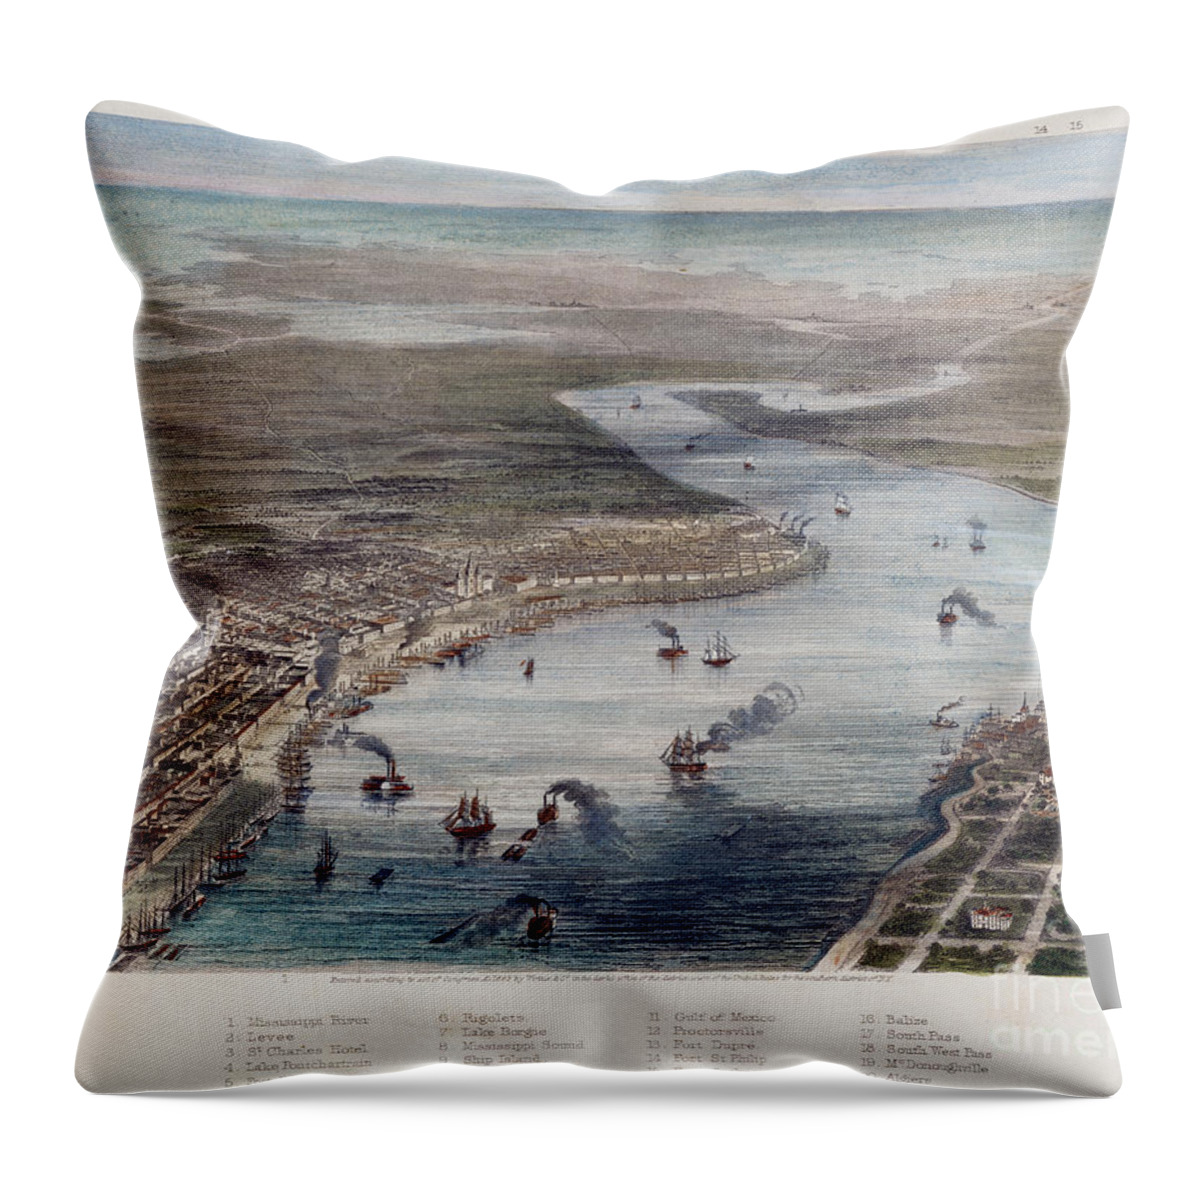 1863 Throw Pillow featuring the photograph New Orleans by Granger